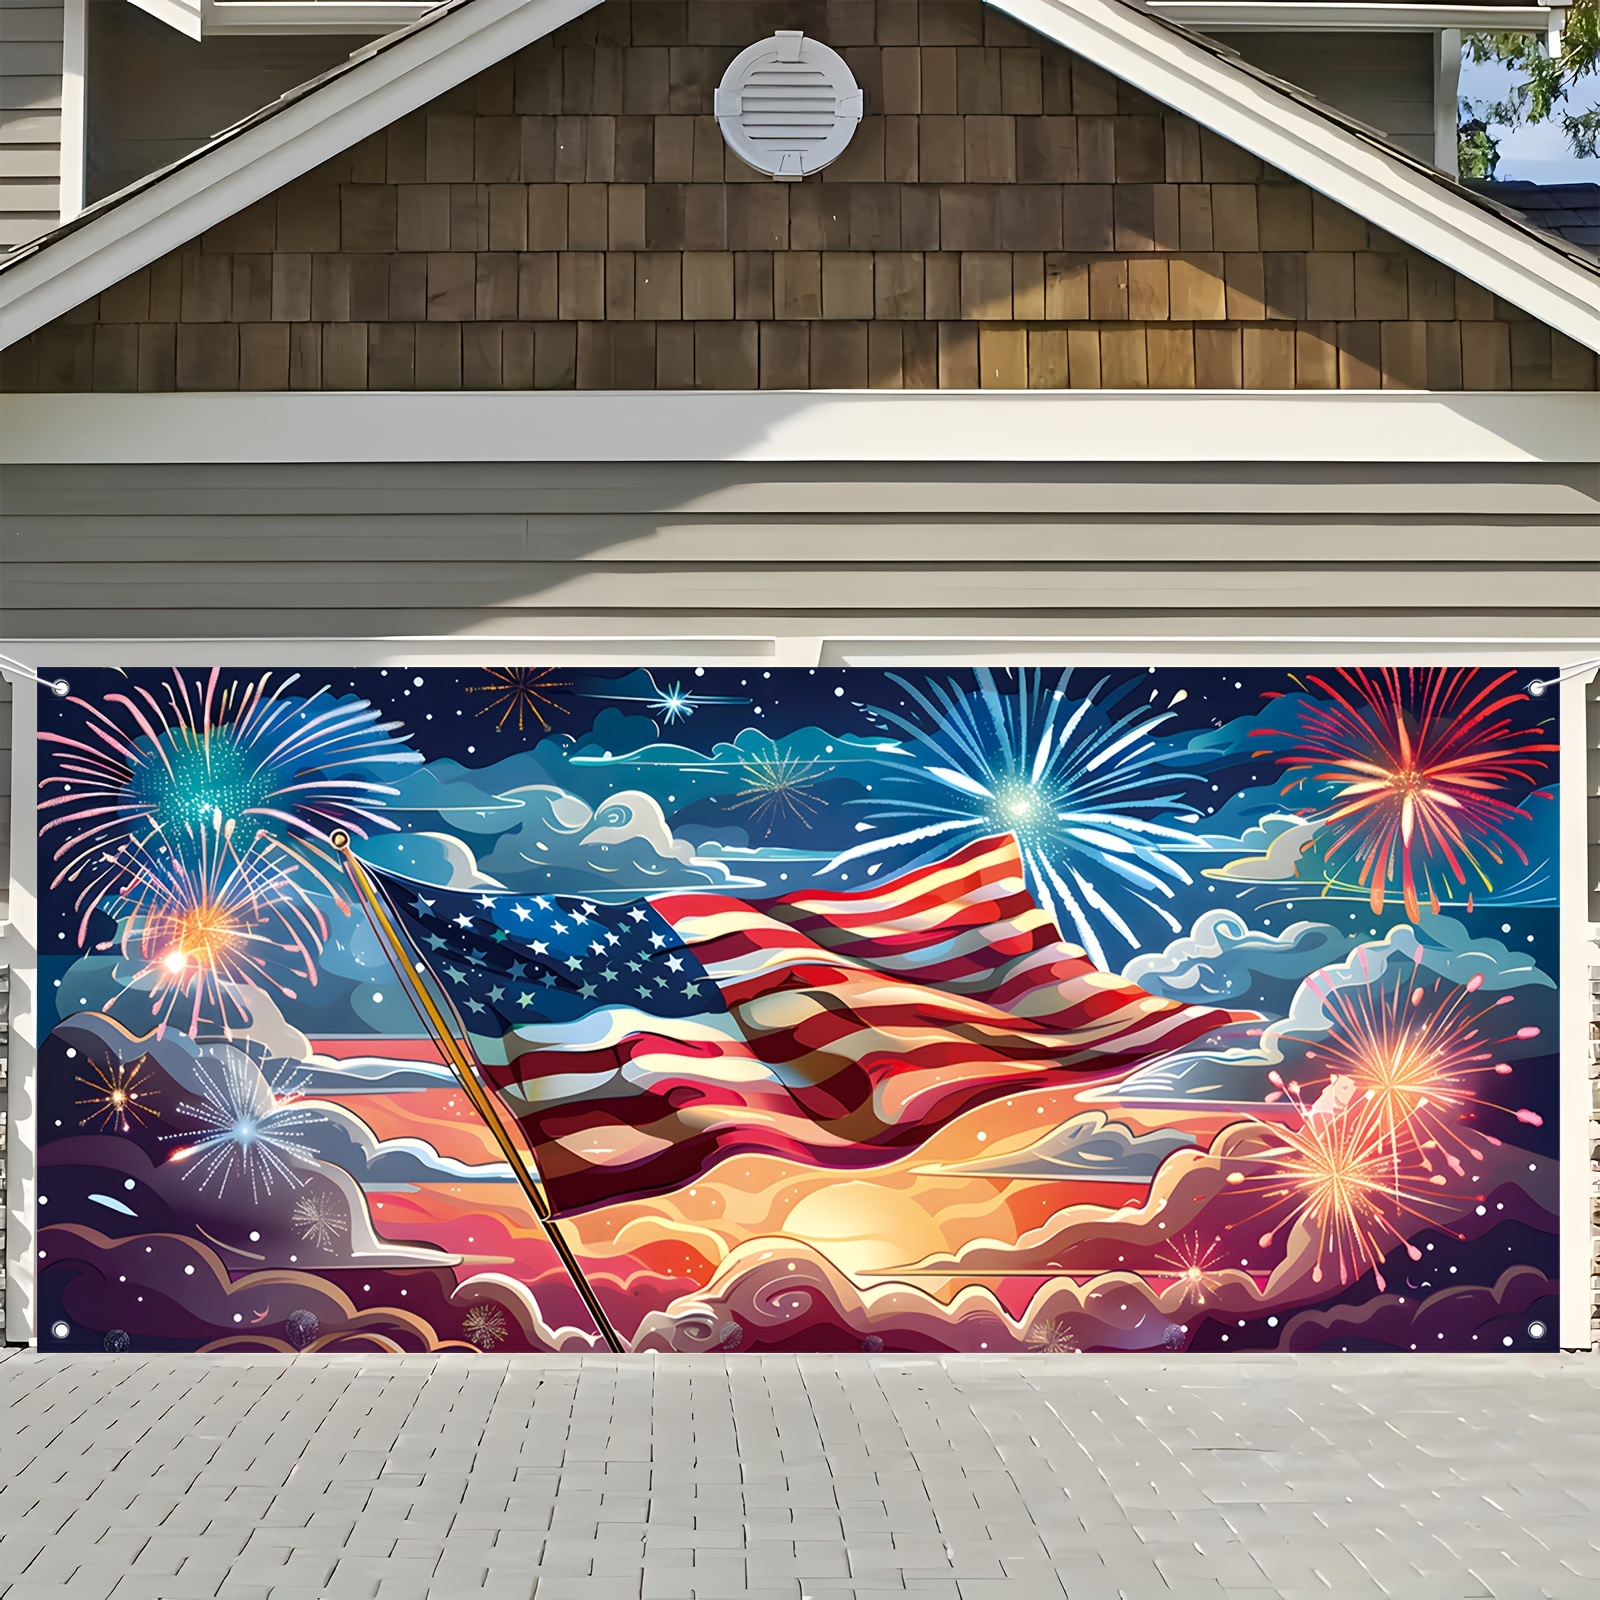 

4th Of July Patriotic Garage Door Banner - American Flag & Fireworks Design, Red & Blue Polyester Hanging Decor 71''x157'', Perfect For Independence Day Outdoor Celebrations